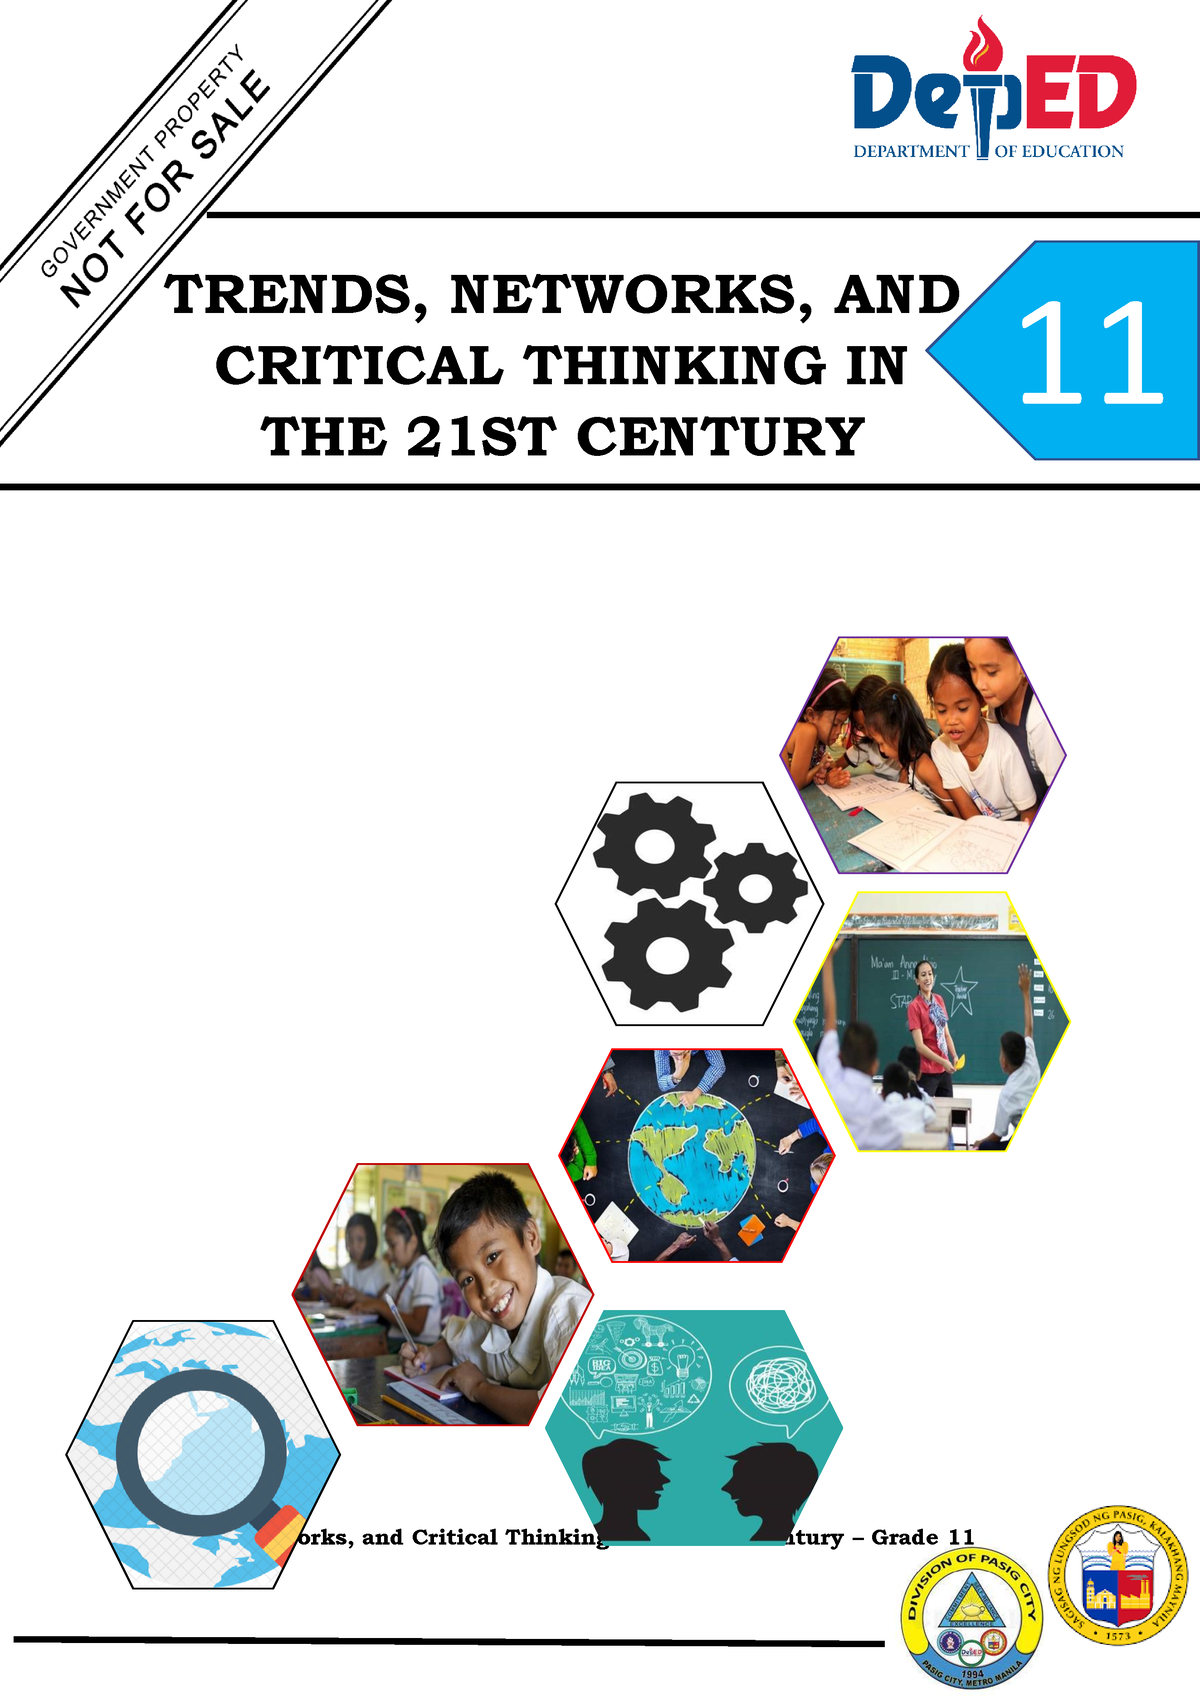 trends networks and critical thinking 4th quarter